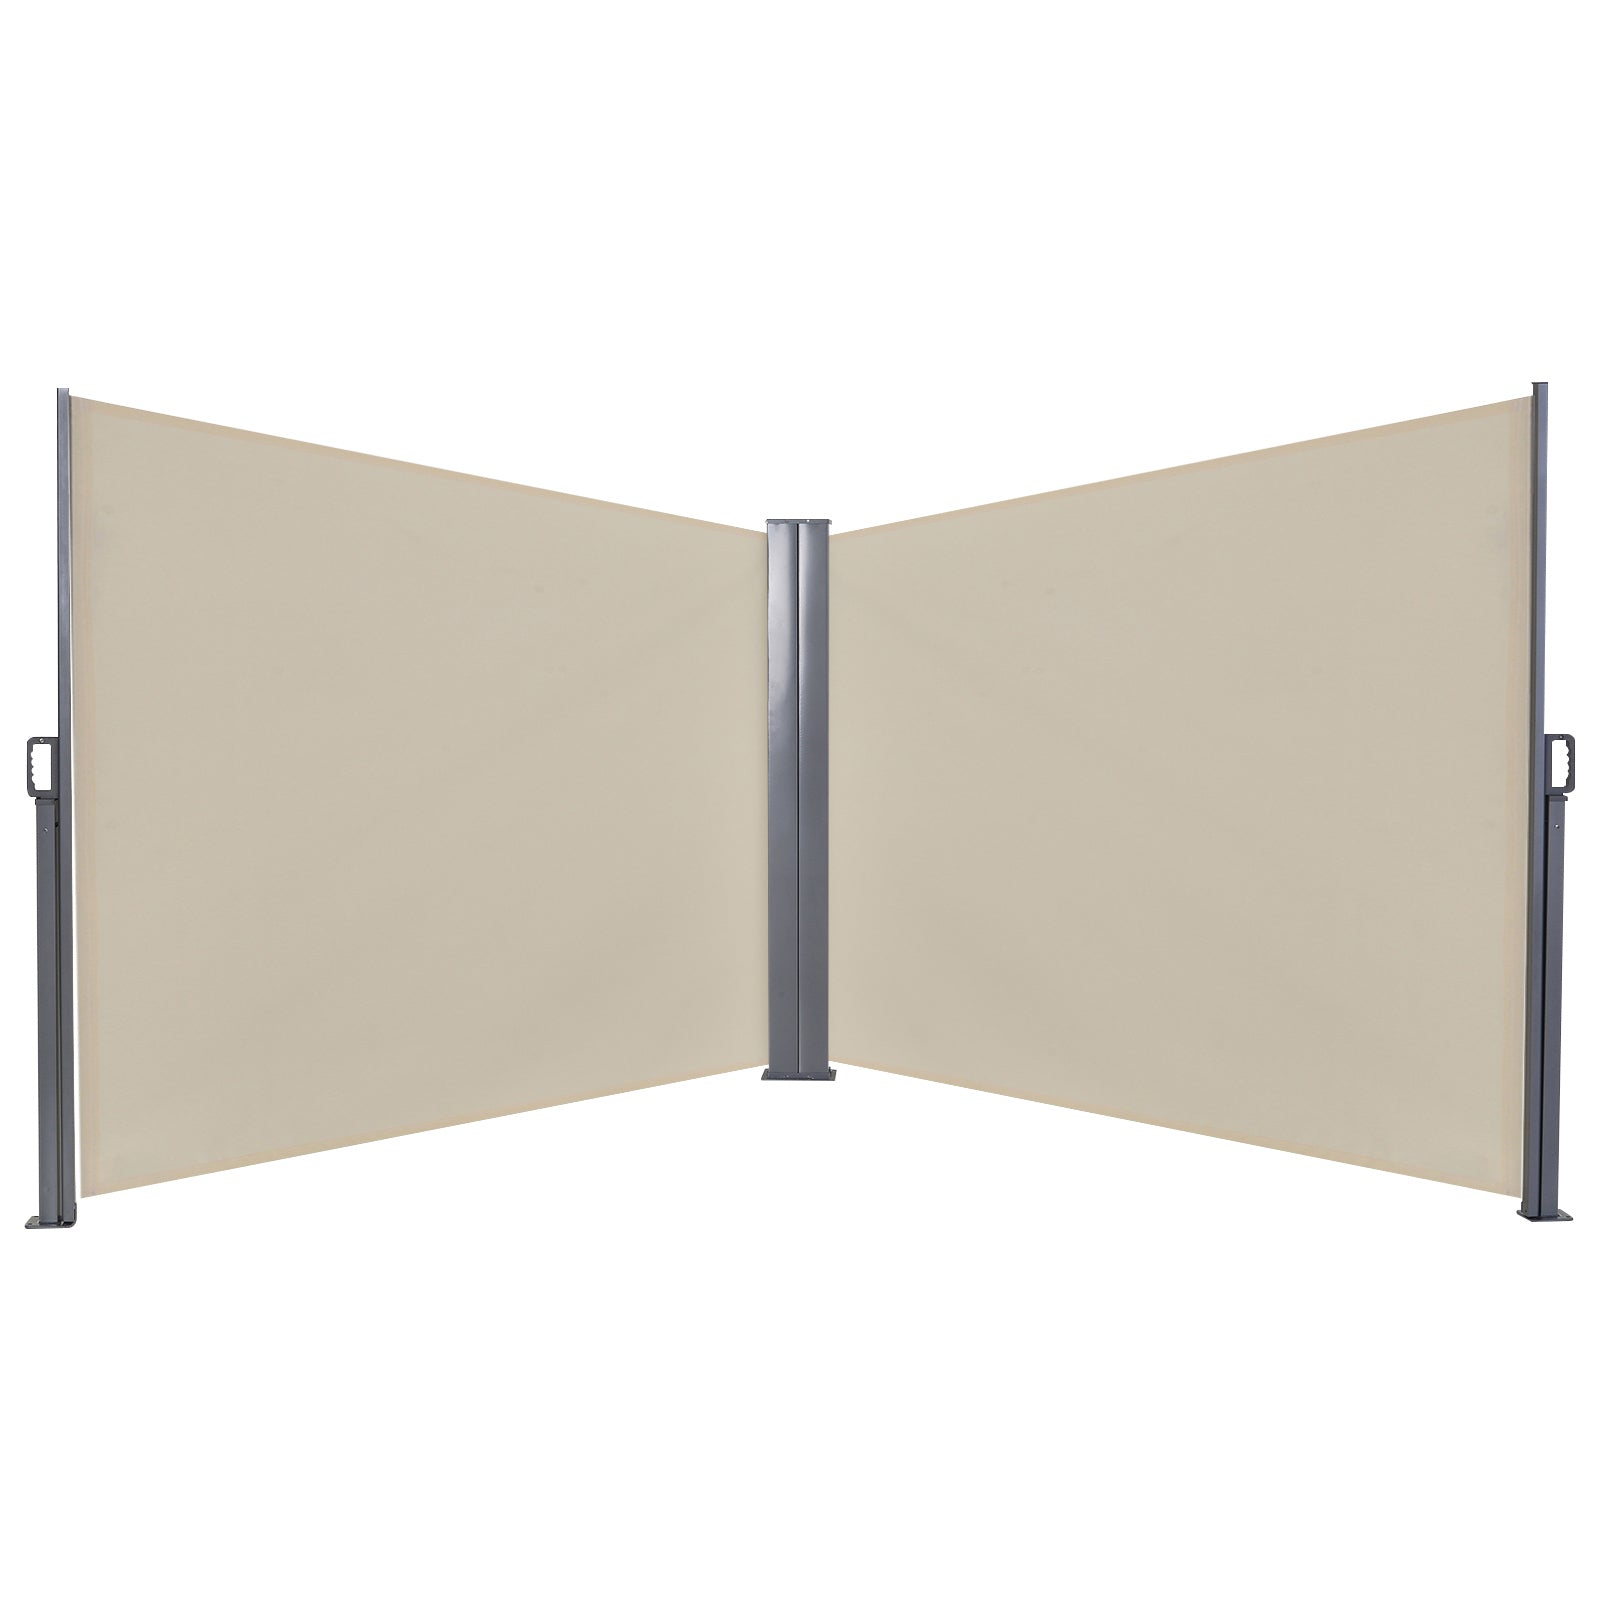 Outsunny Retractable Double Side Awning Screen Fence Privacy Beige - 6x1.8m  | TJ Hughes